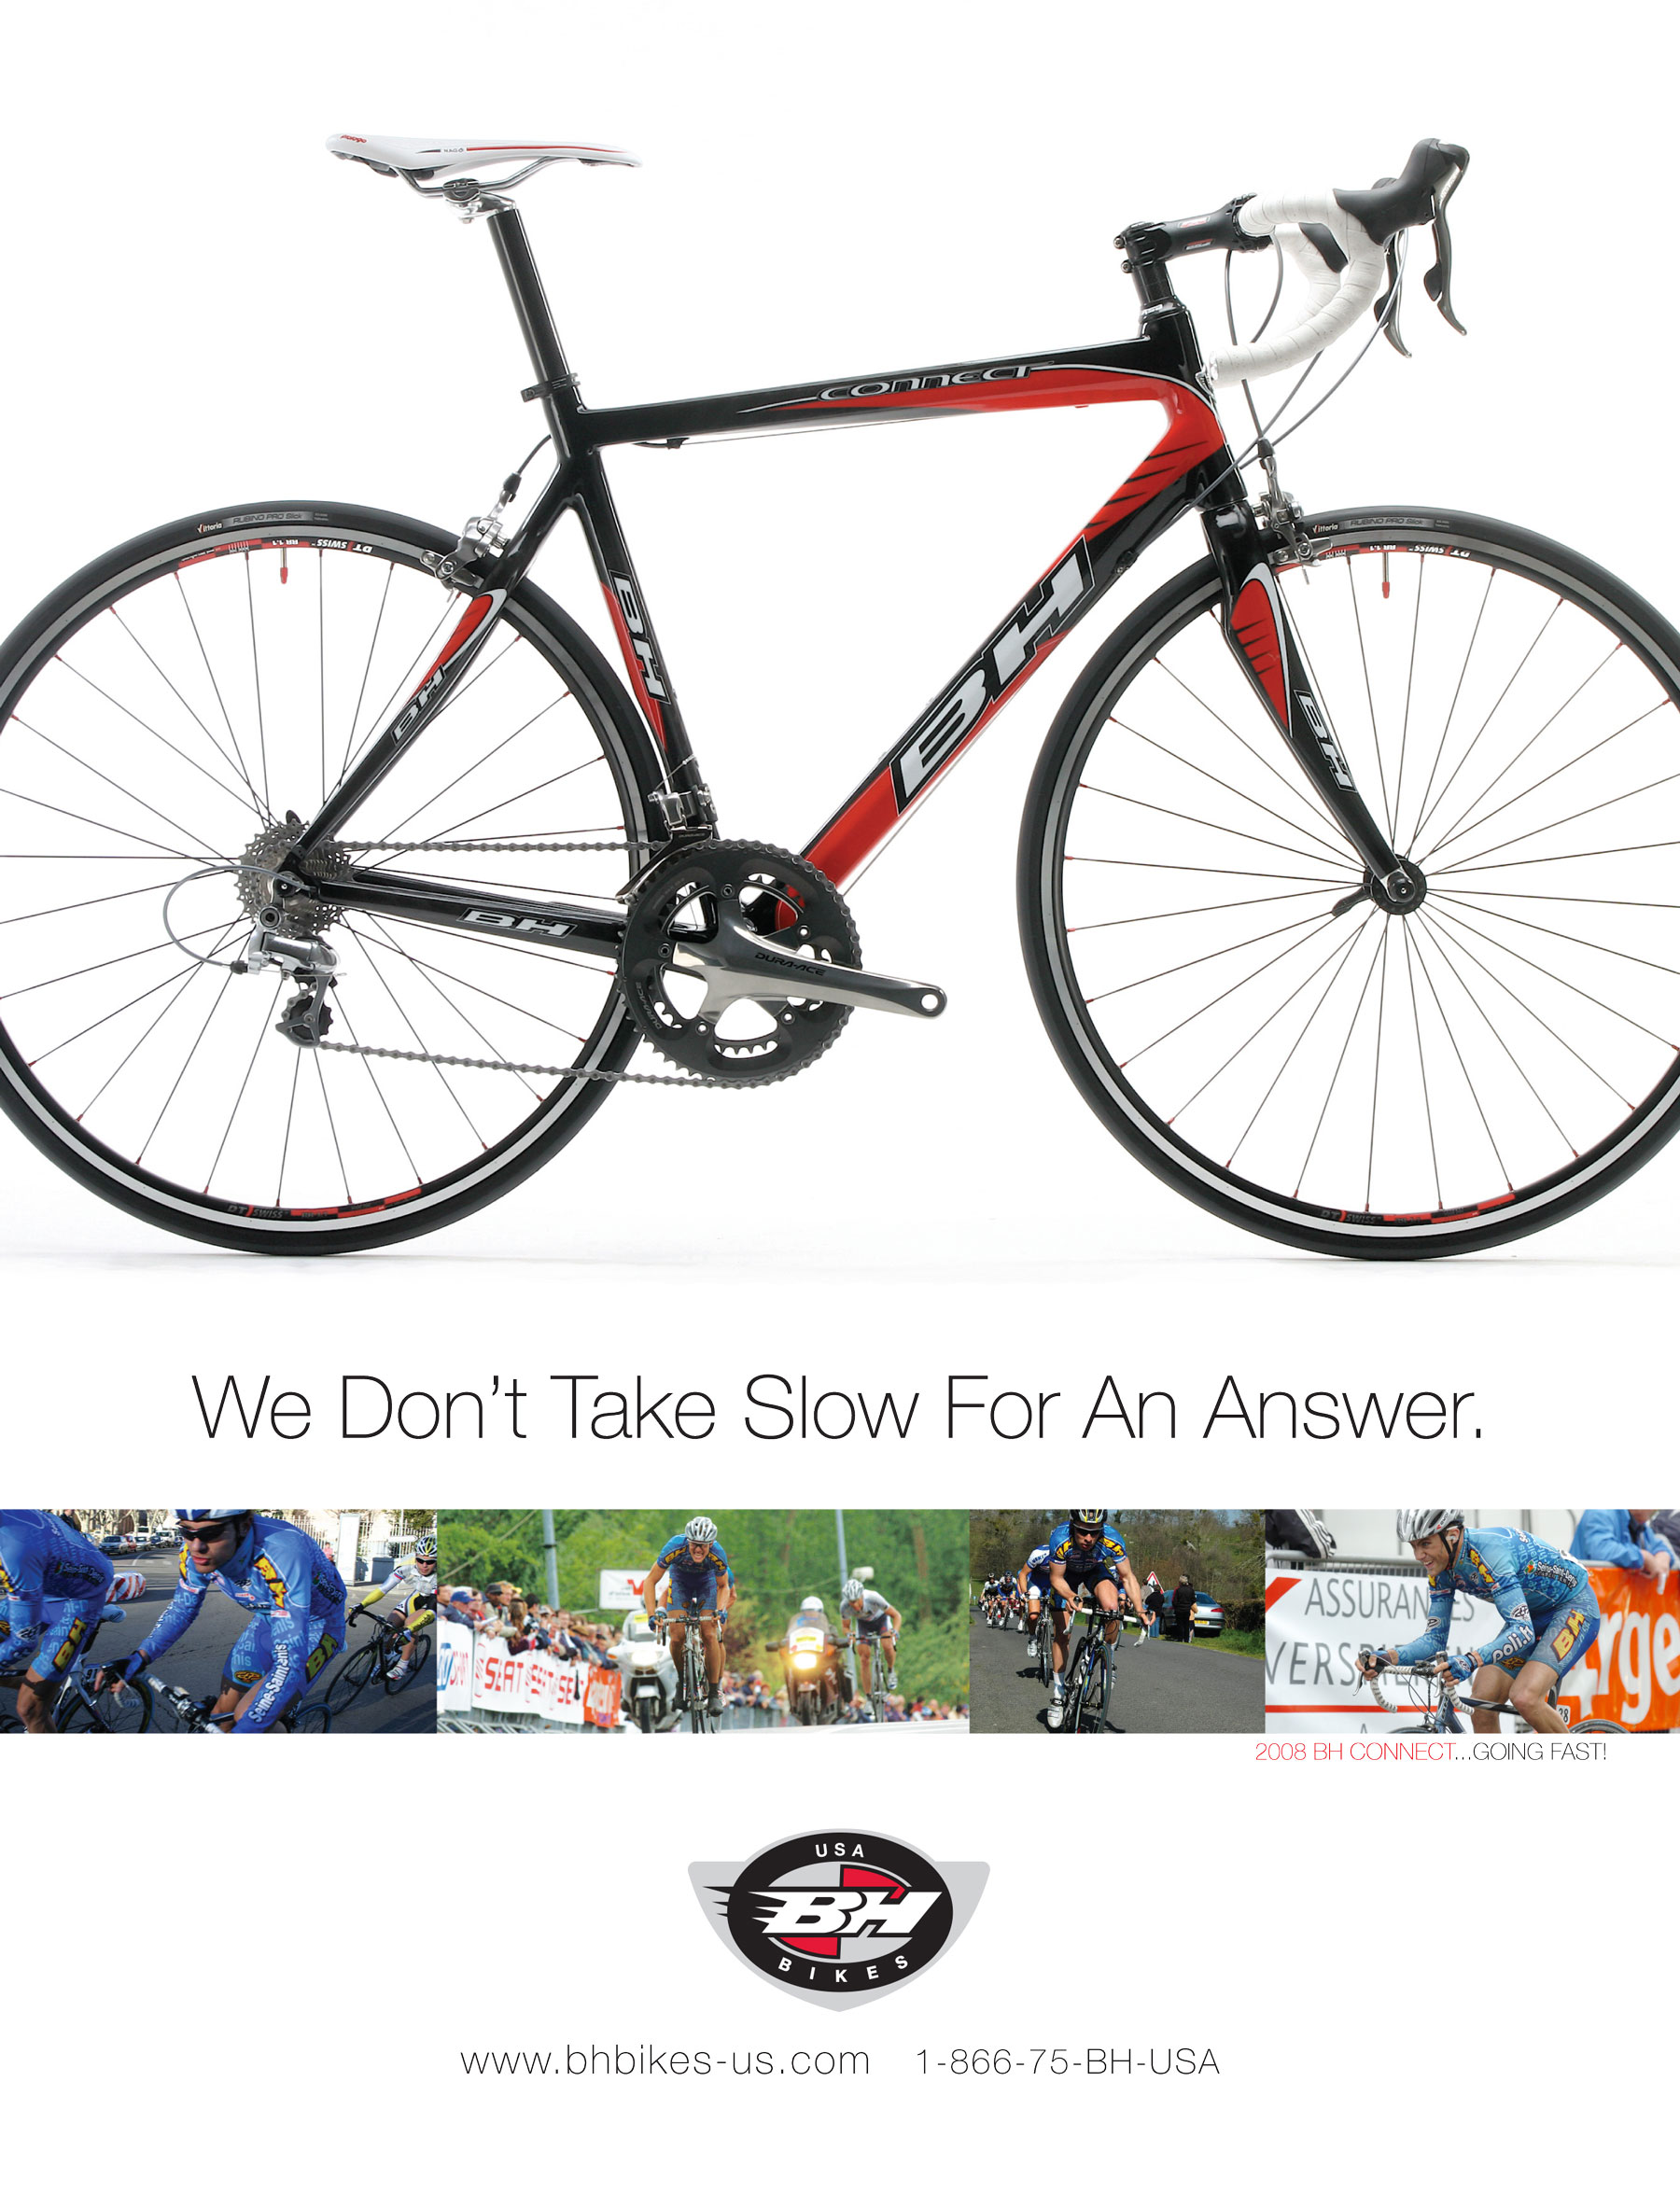 Cyclesport 11-07 (connect) ad